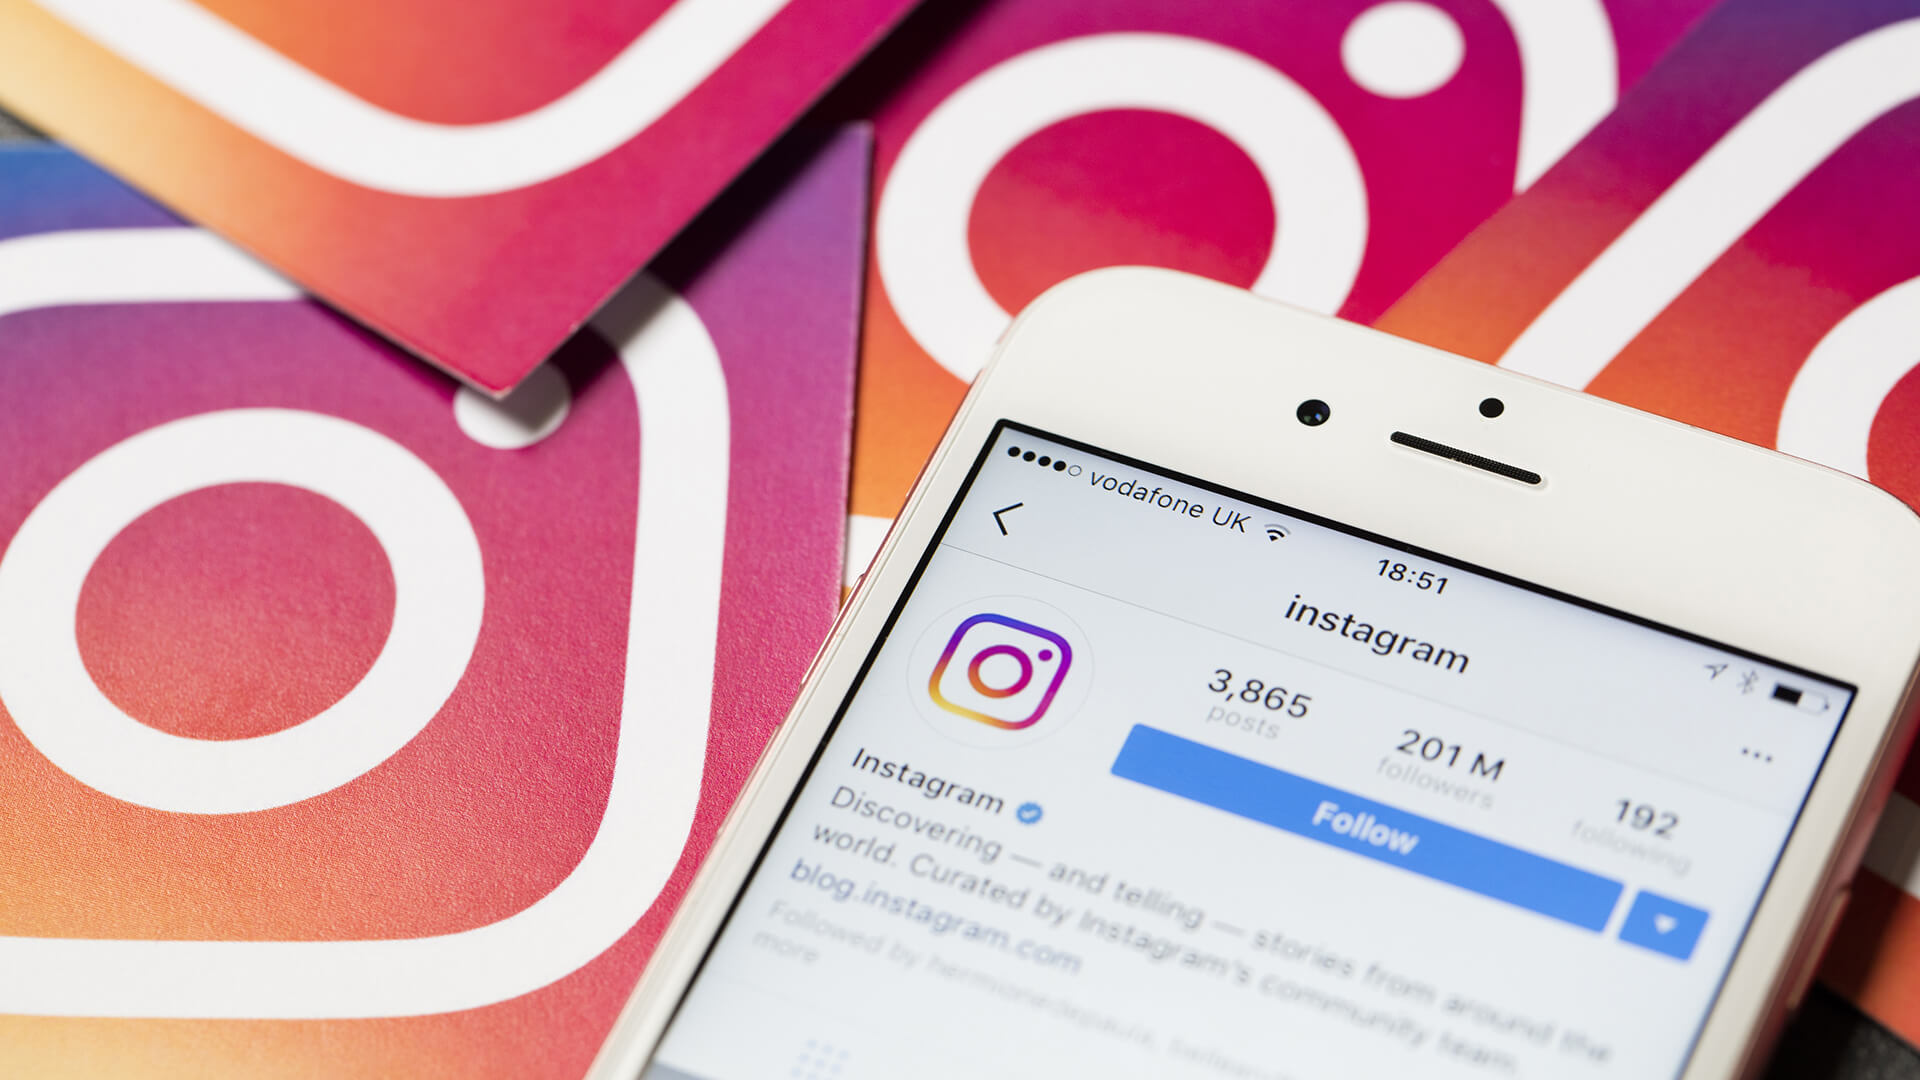 Buy Instagram likes fast and allow your business attain more post thumbnail image